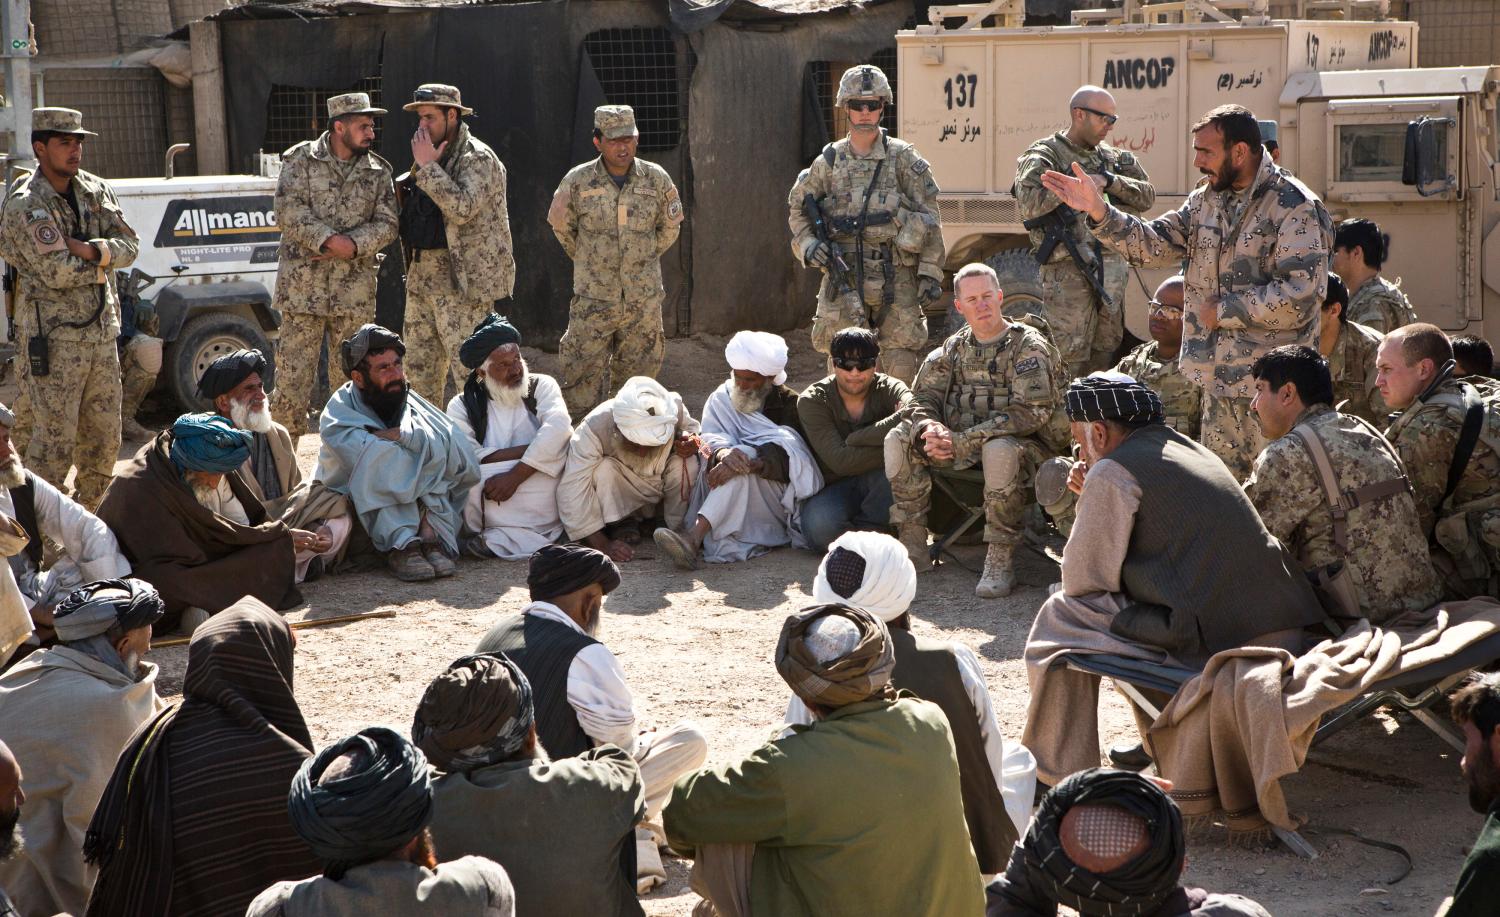 Afghans listen to a speaker at a shura - a meeting between village elders, U.S. troops and Afghan National Security Forces - near Command Outpost AJK (short for Azim-Jan-Kariz, a near-by village) in Maiwand District, Kandahar Province, Afghanistan, January 26, 2013. REUTERS/Andrew Burton (AFGHANISTAN - Tags: POLITICS MILITARY) - RTR3CZMS